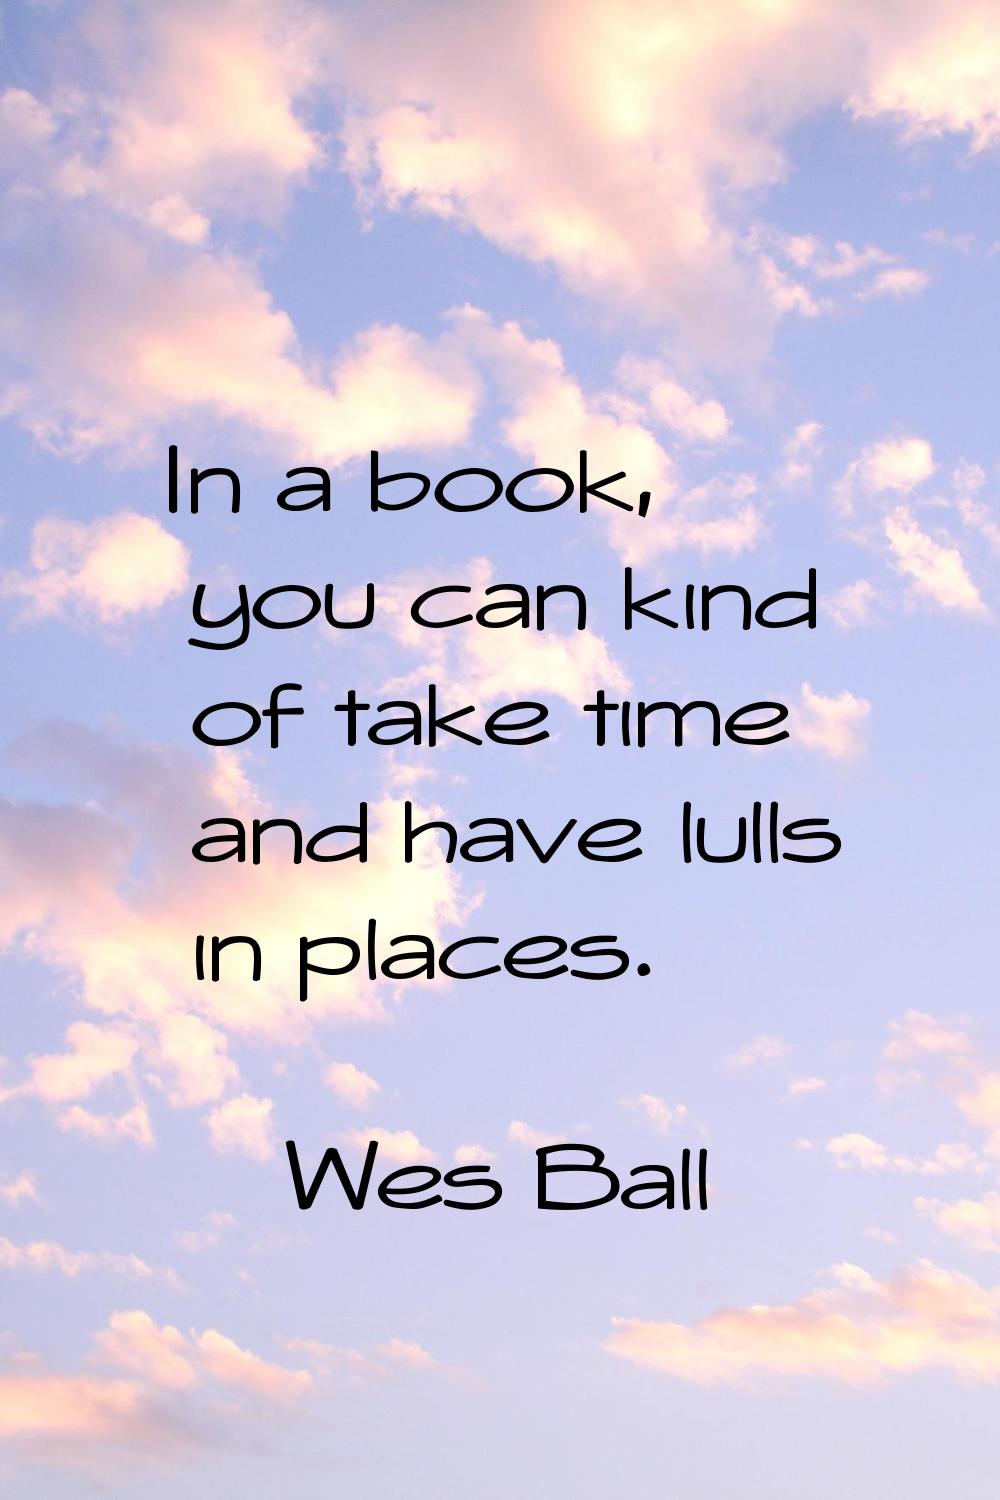 In a book, you can kind of take time and have lulls in places.